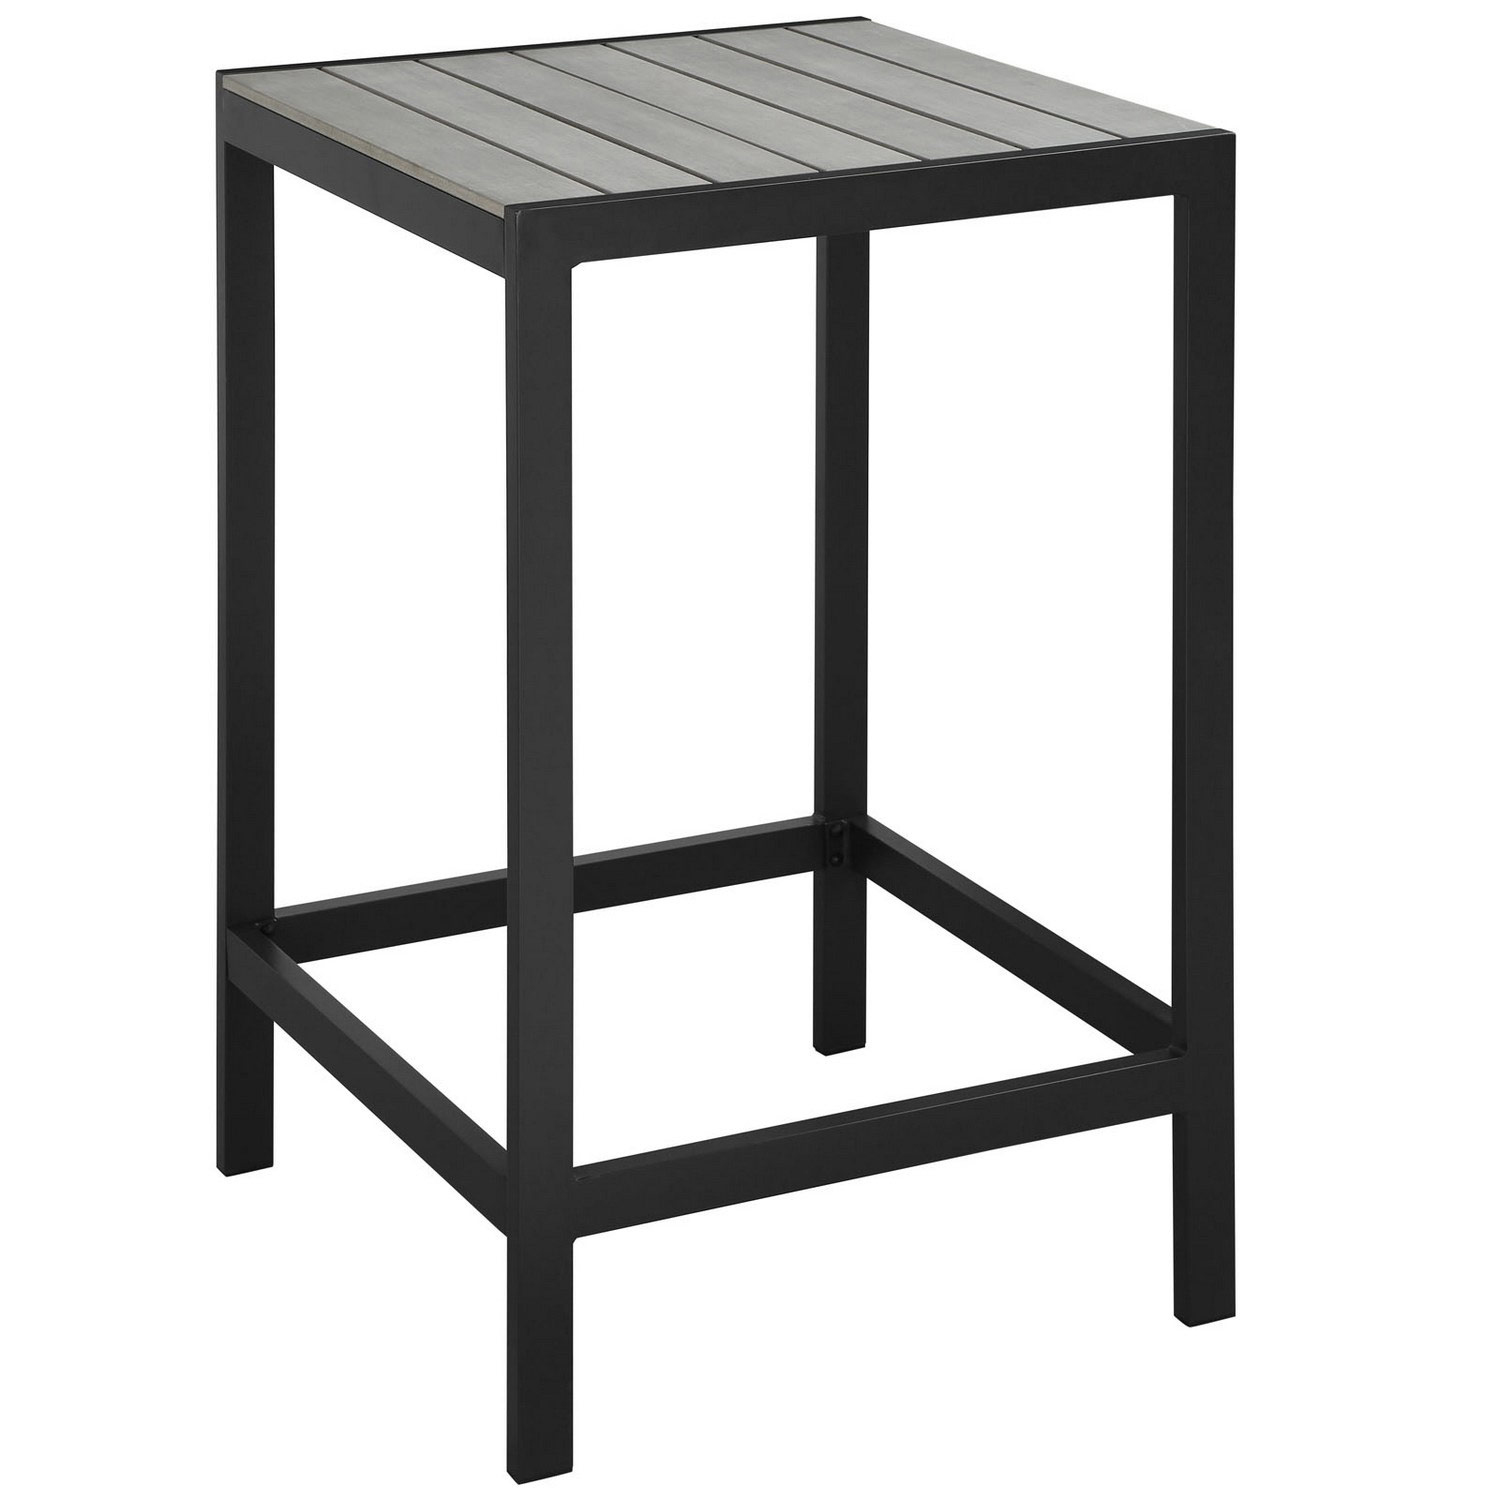 Modway Maine Outdoor Patio Bar Table - Brown/Gray